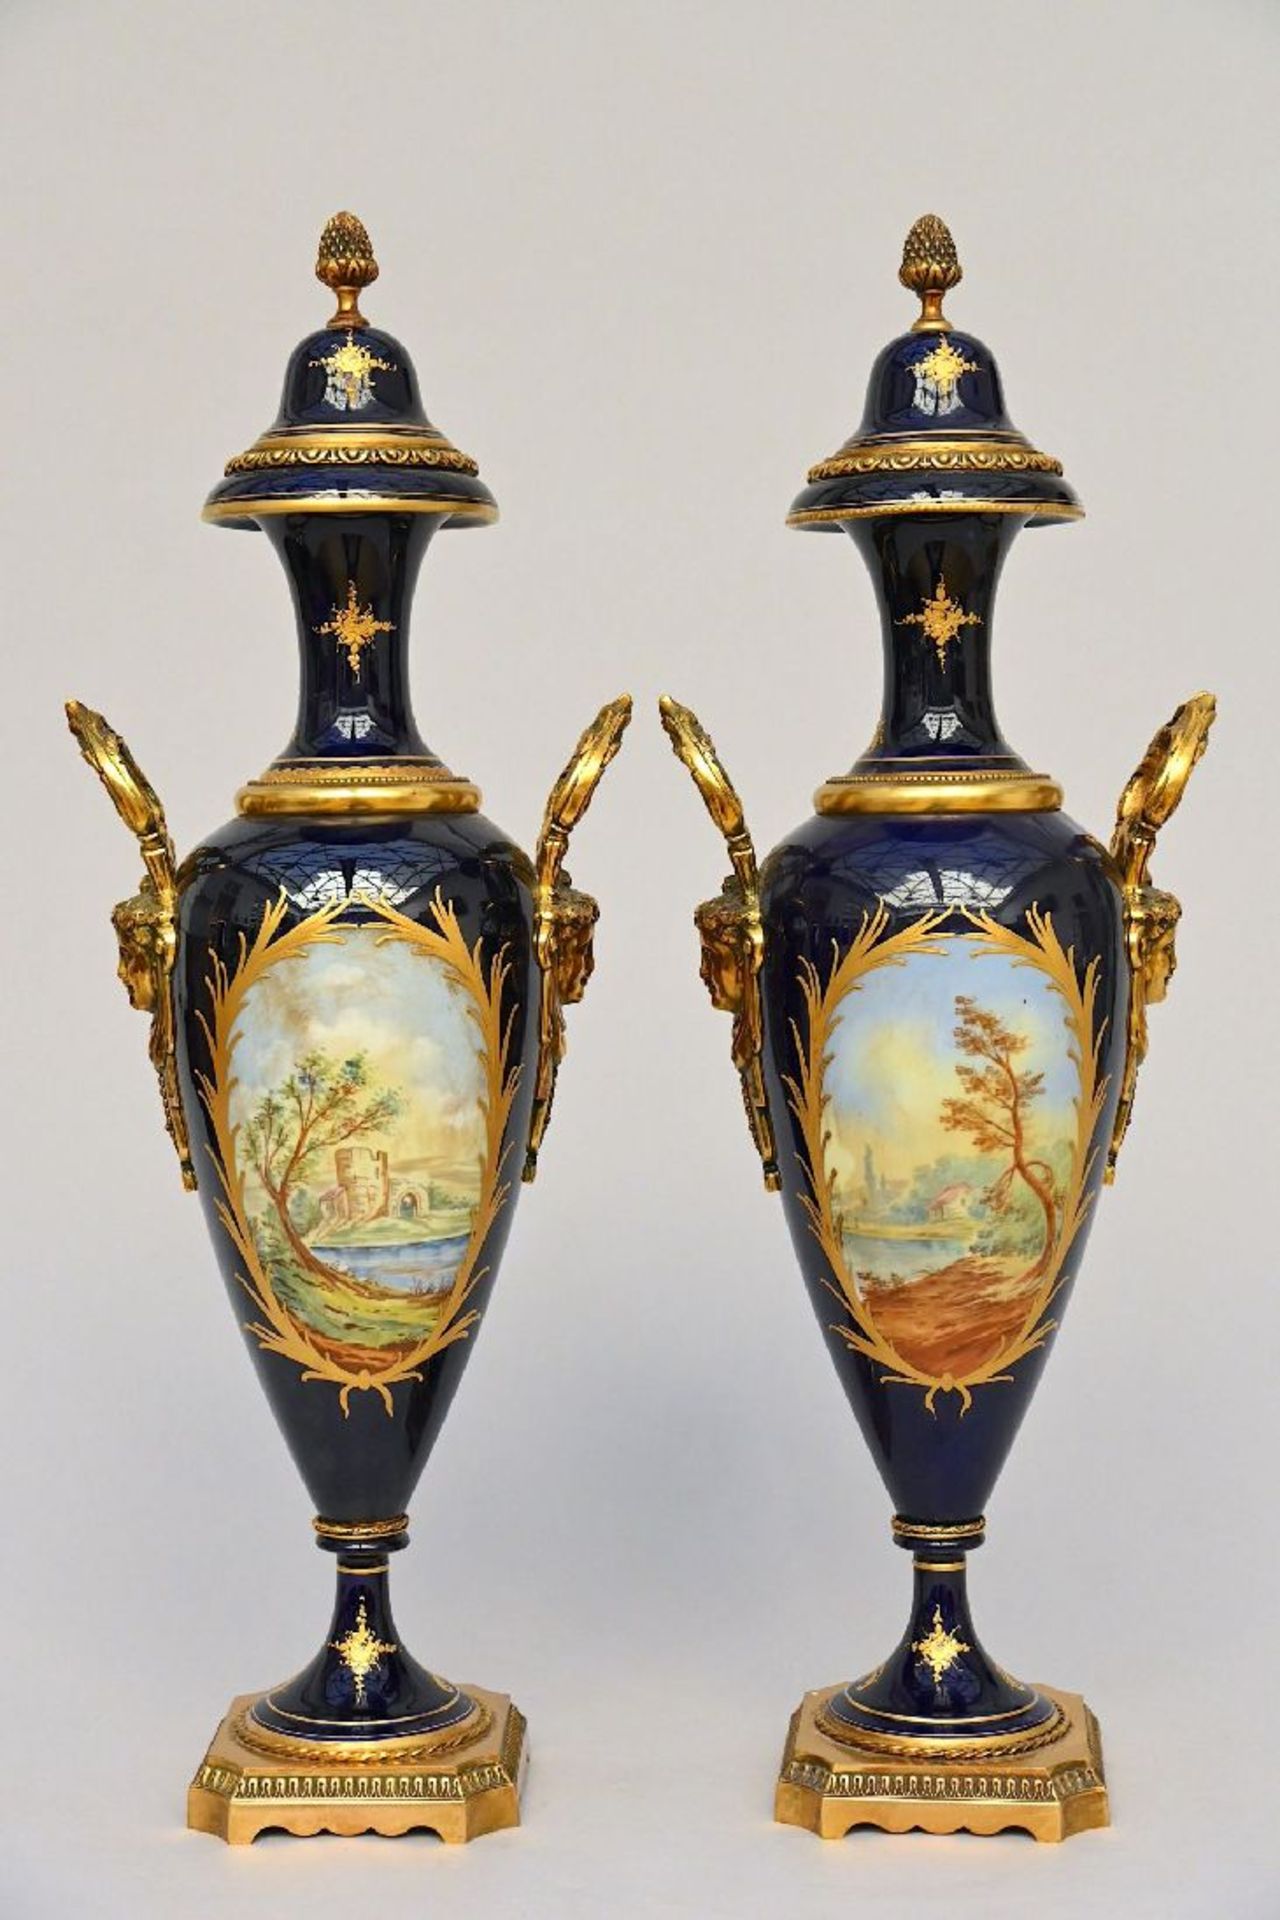 Pair of Sèvres style porcelain vases - Image 2 of 6